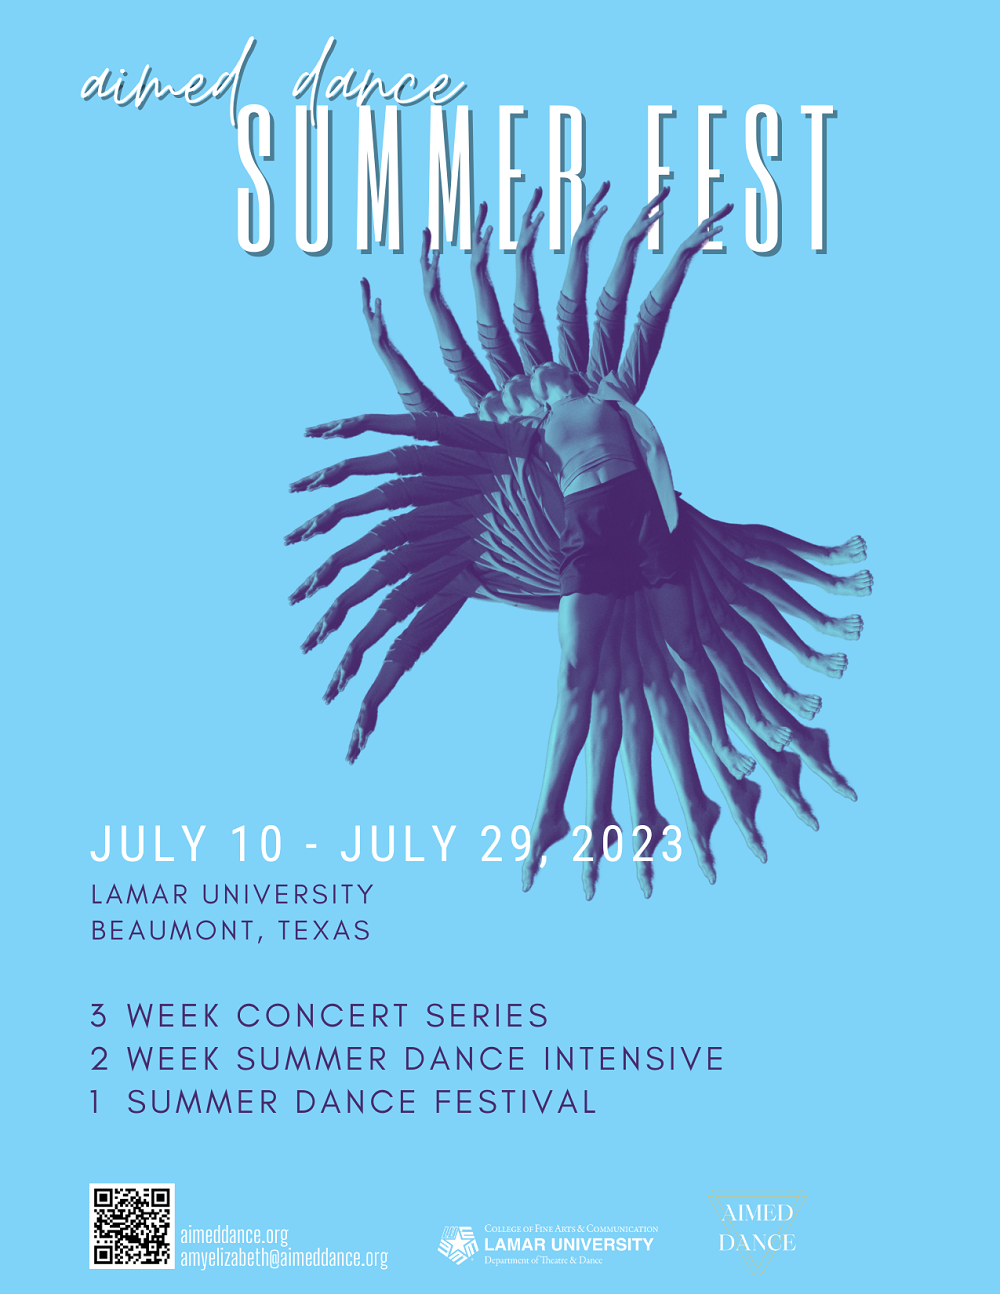 <strong>3... 2... 1... Aimed Dance Launches Summer Fest 2023</strong>